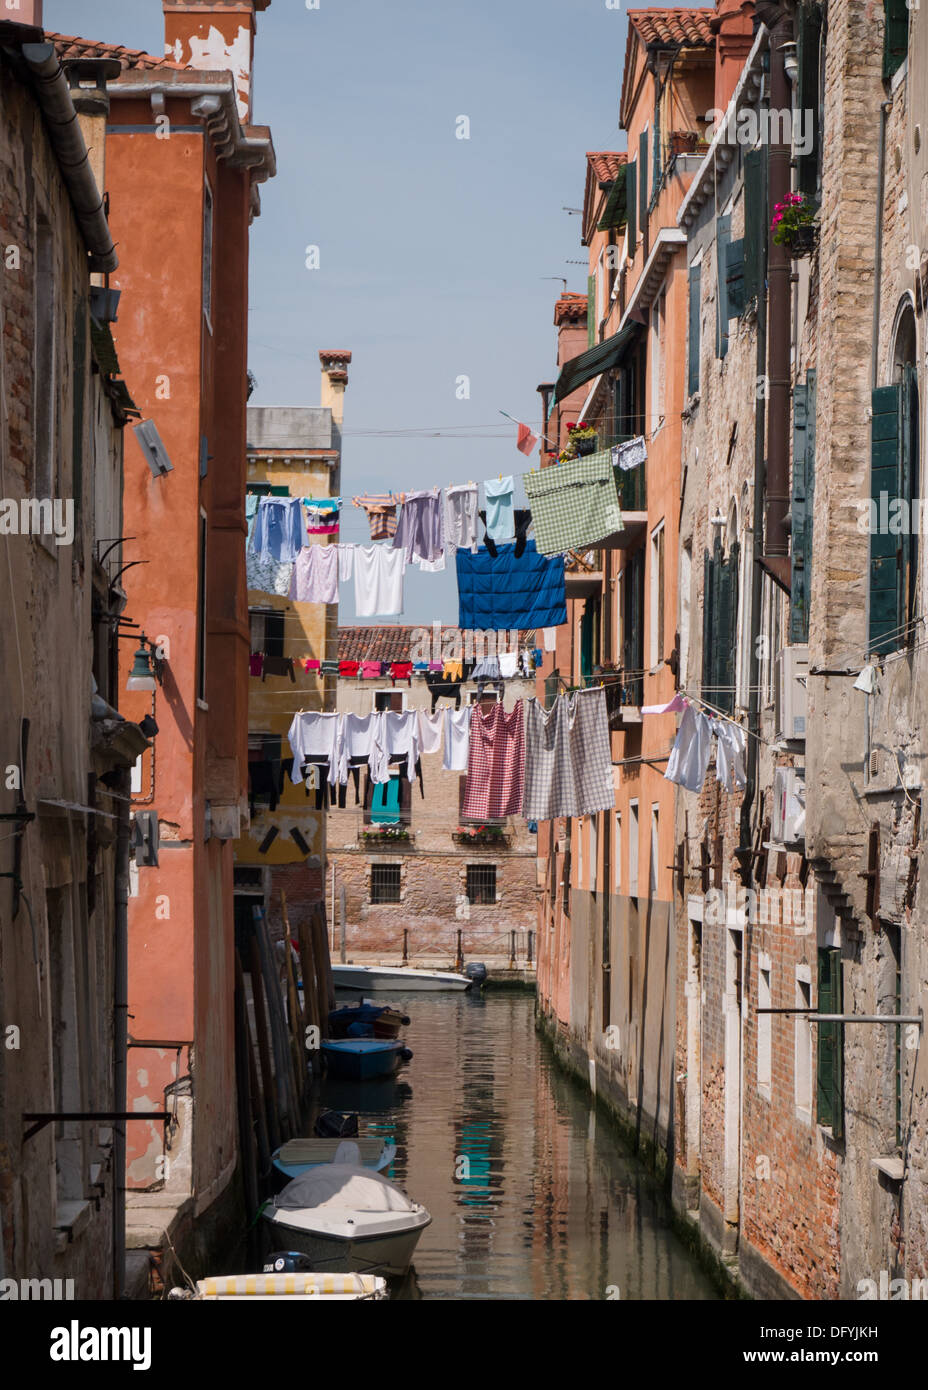 Quiet canal in Venice with wash hanging out to dry Stock Photo